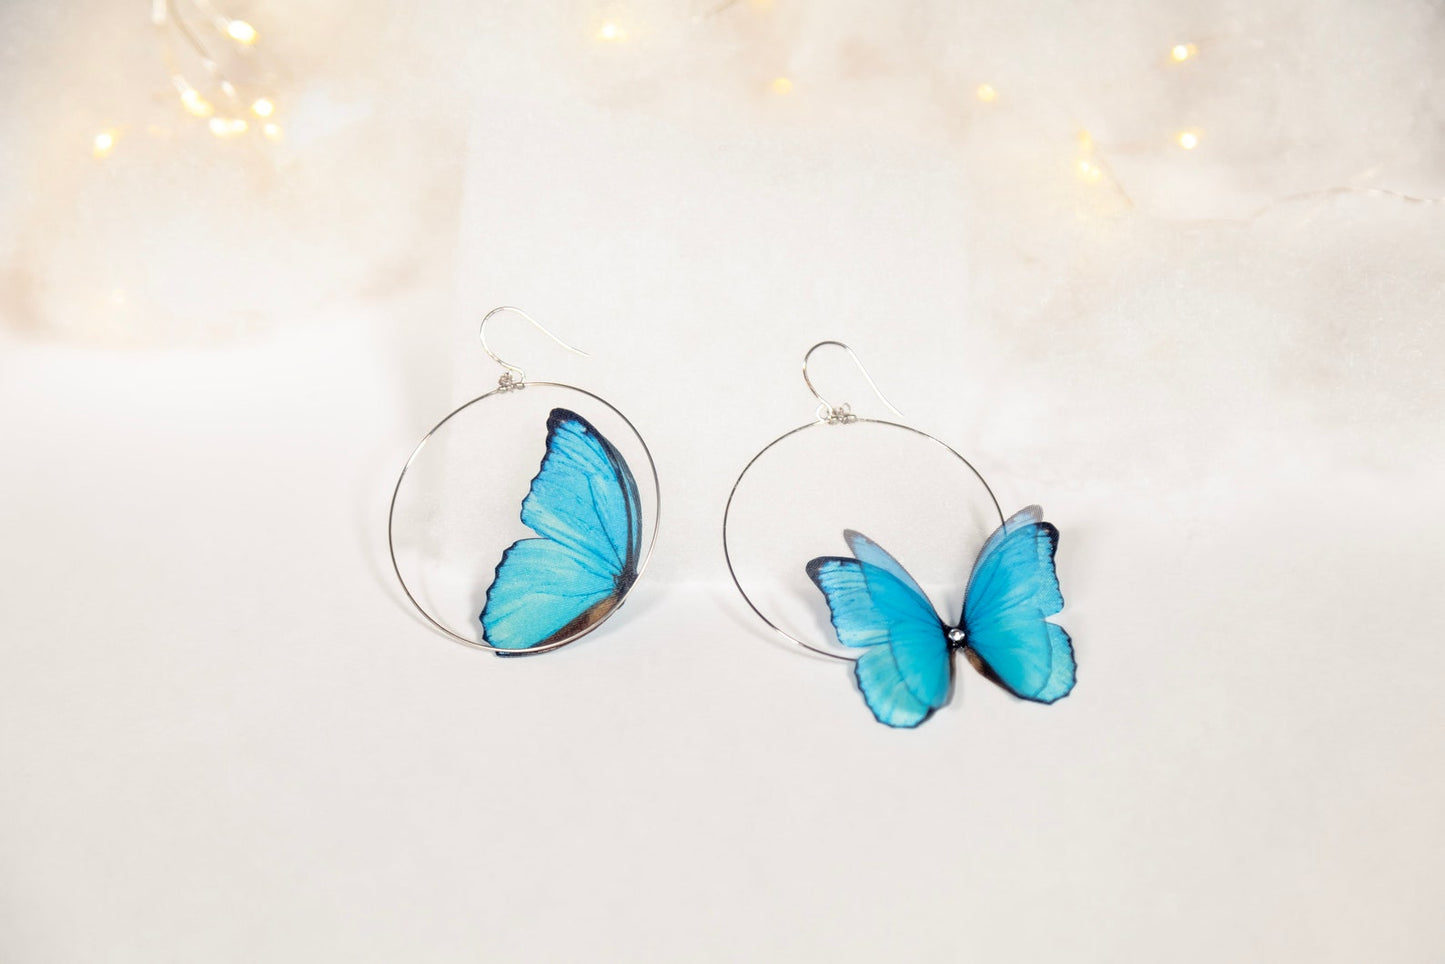 Blue Butterfly Hoop Earrings Modeled on Ear with Casual Clothing